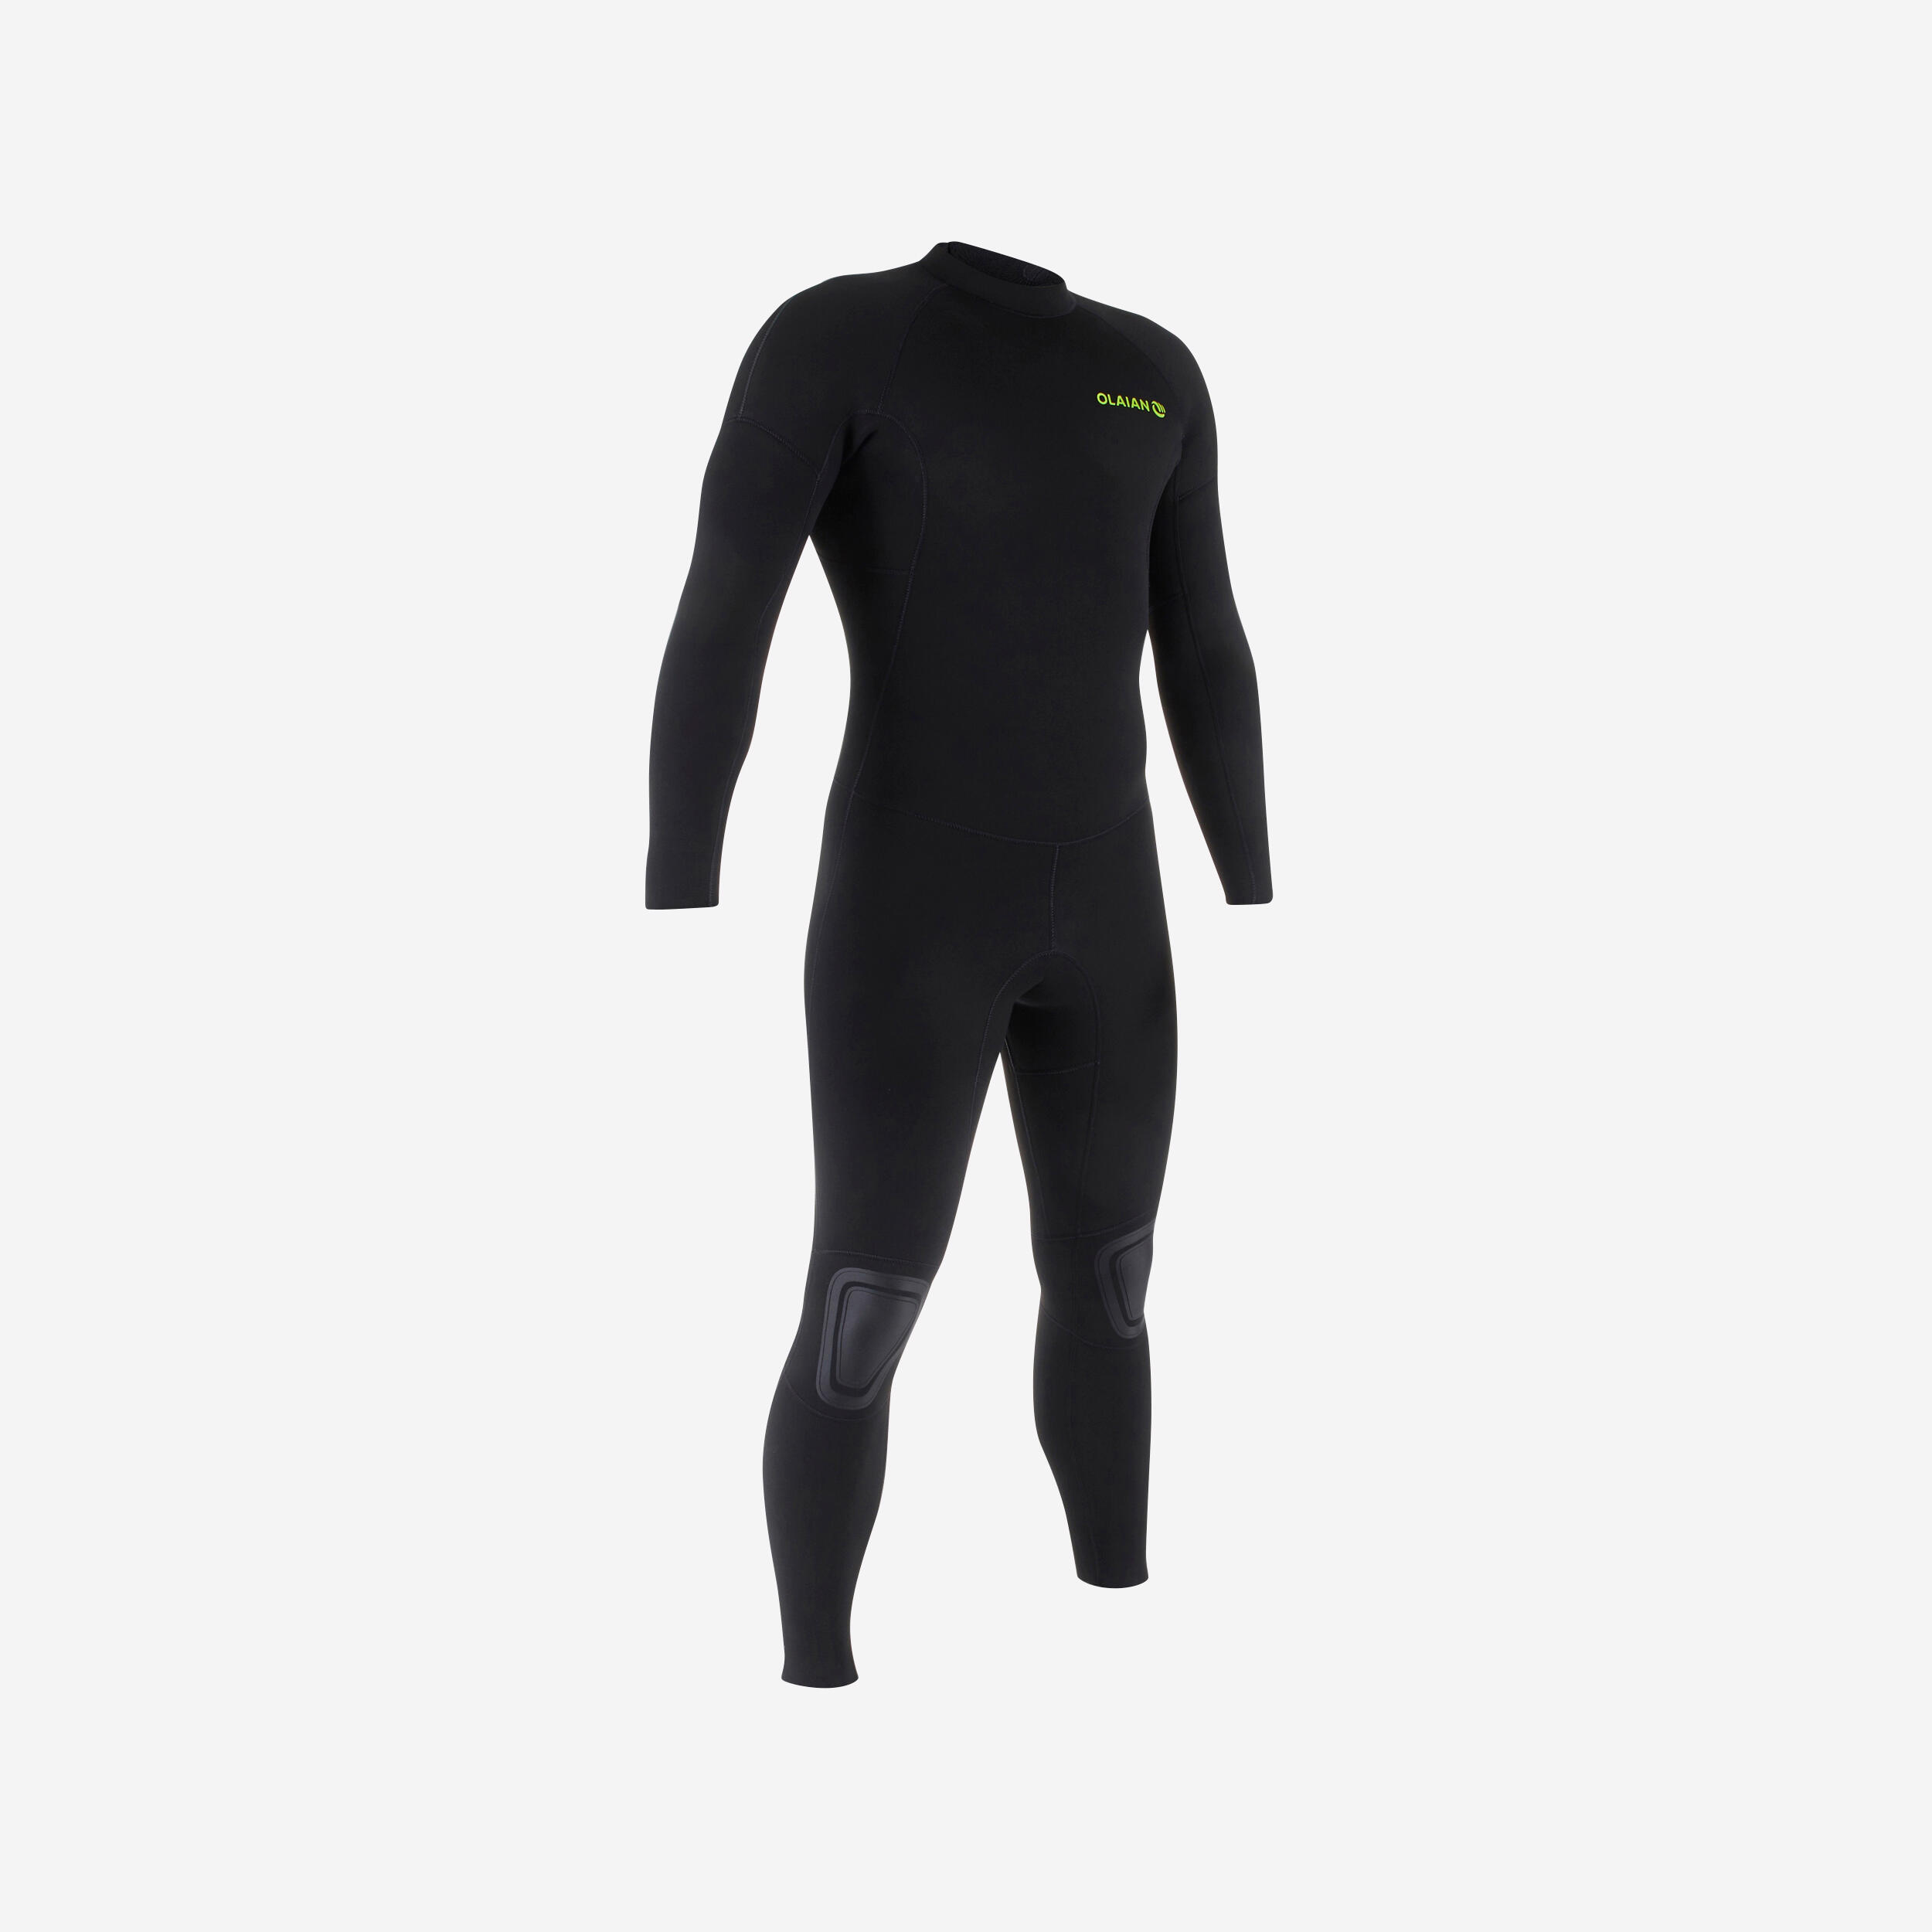 REALON Wetsuit Men 4/5mm Womens Neoprene Full Body Thermal Scuba Diving  Suits, 3/4mm One Piece Wet Suit Cold Water Swimsuits For Surfing Snorkeling